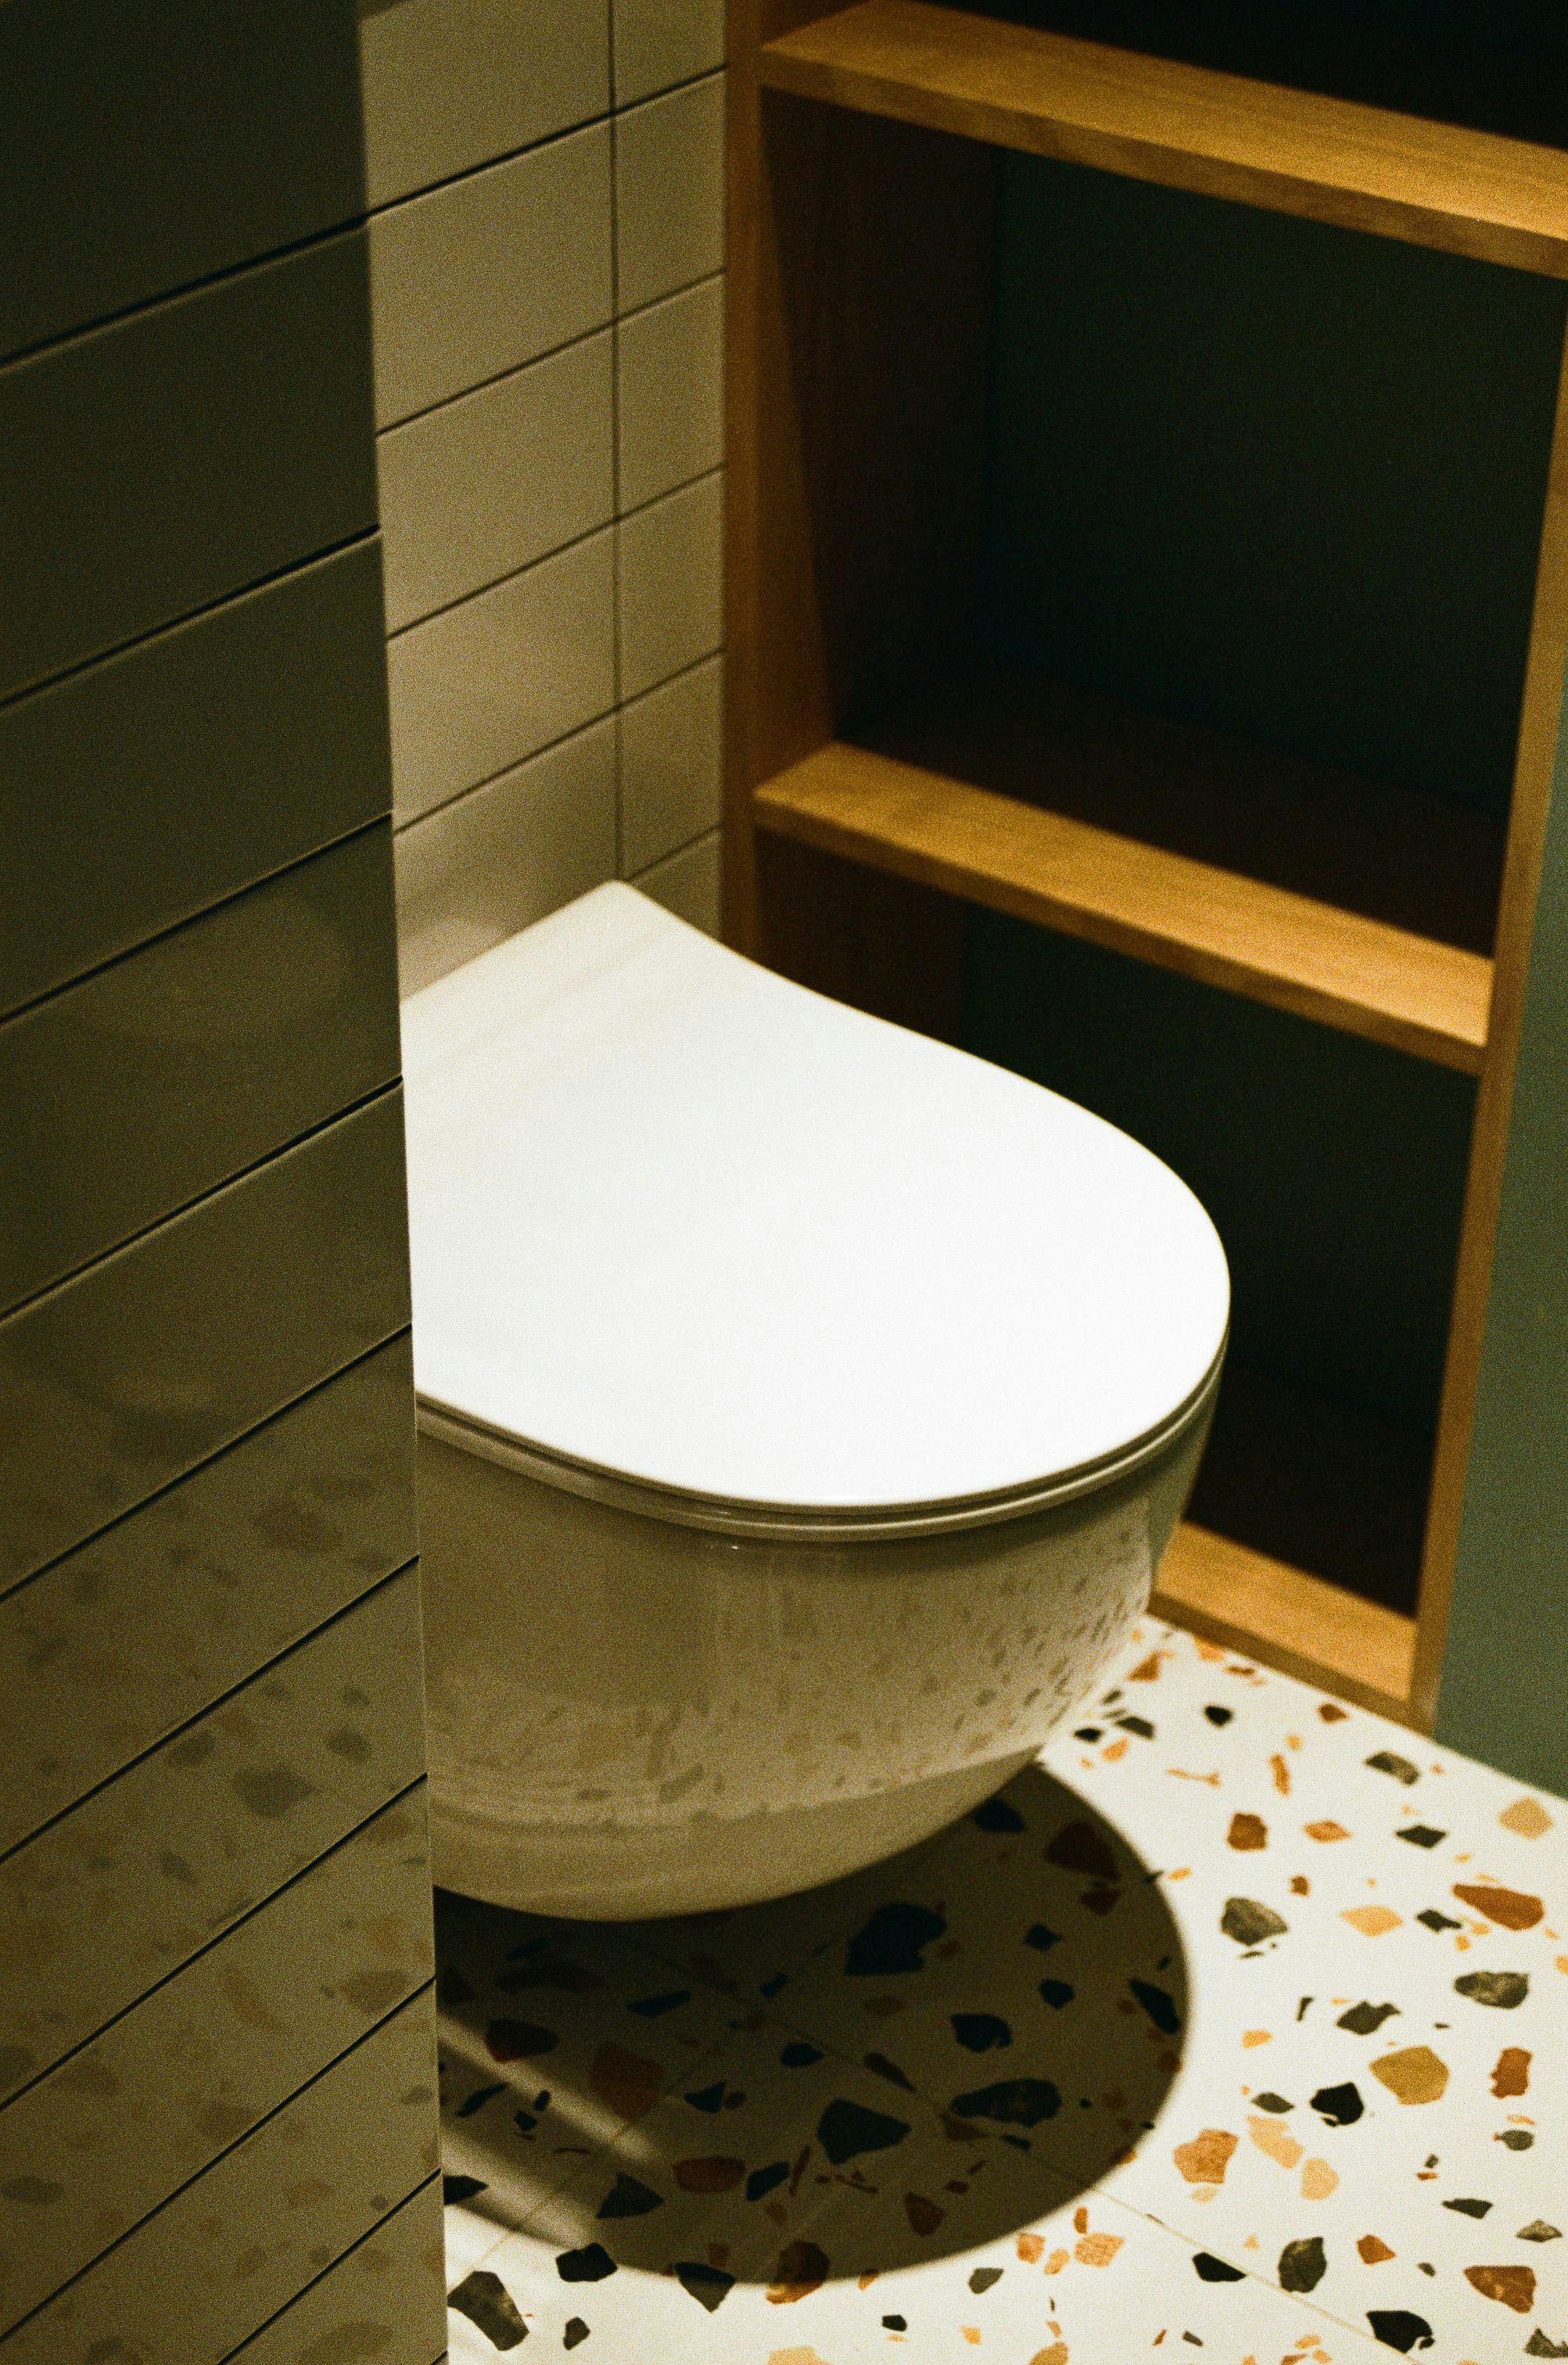 A modern smart toilet with touch screen control panel